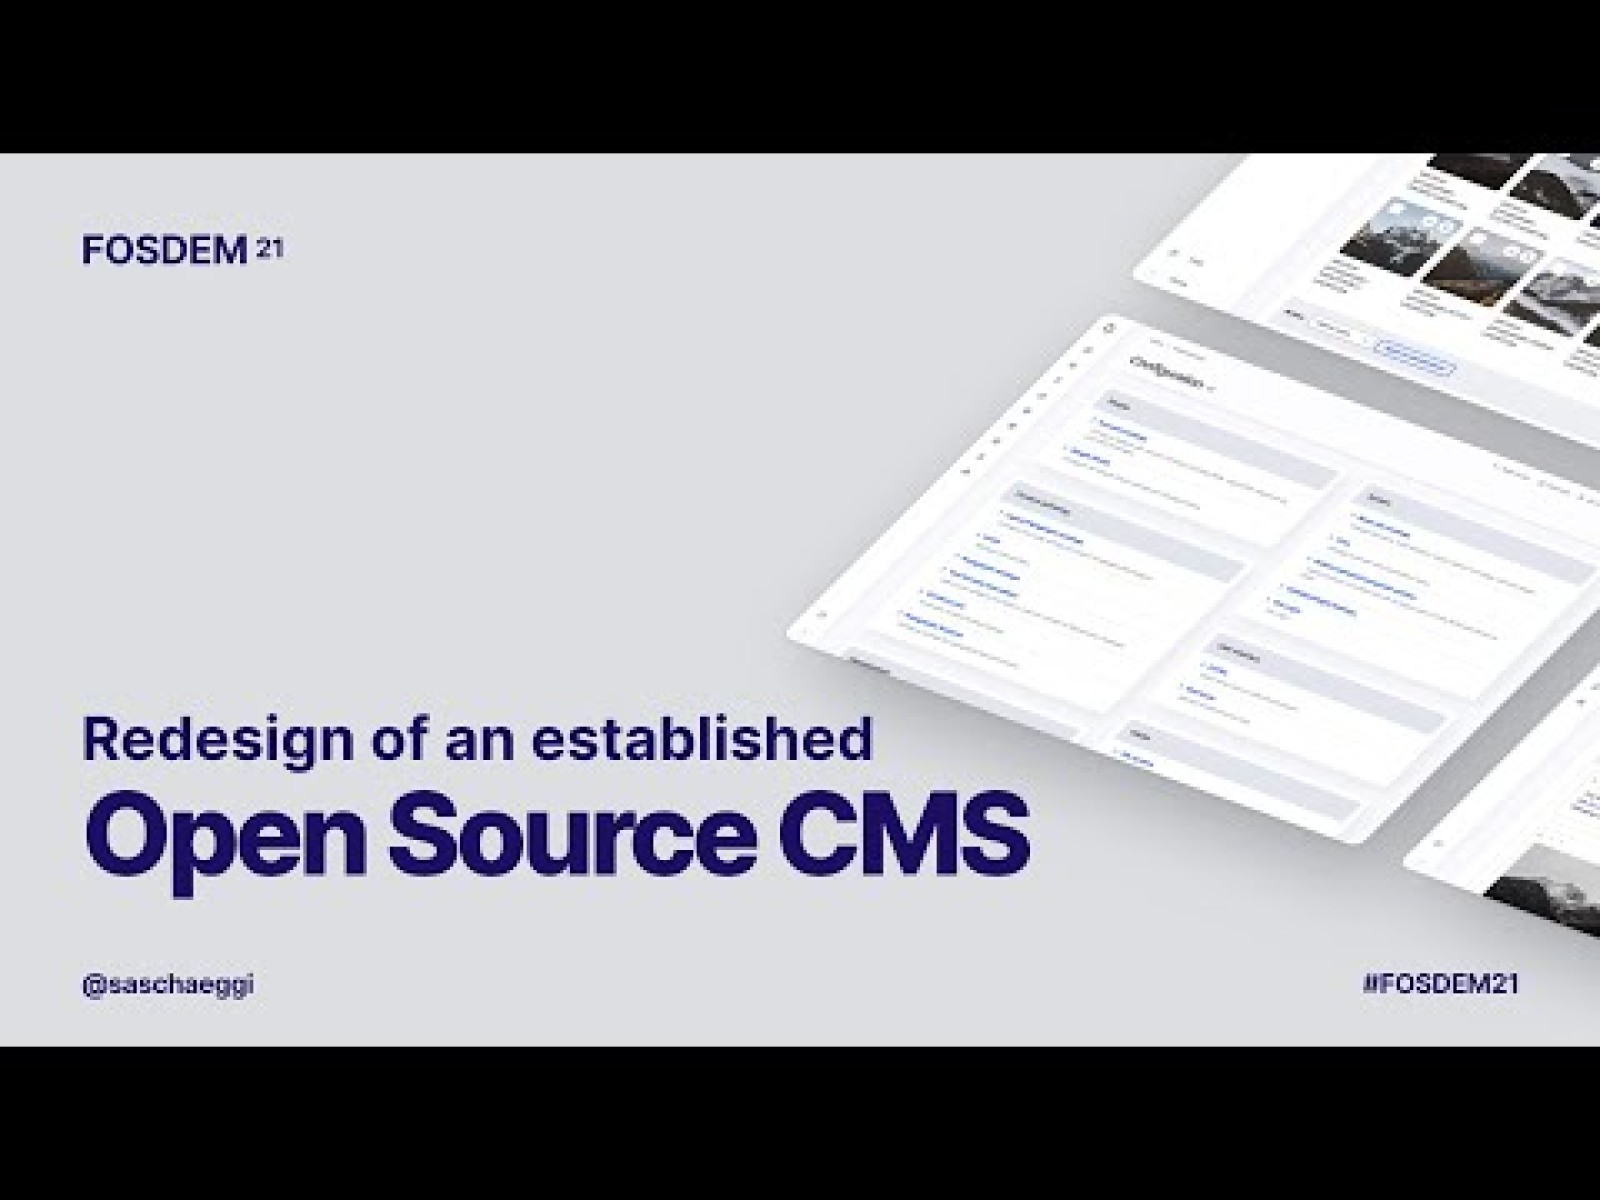 Redesign of an established Open Source CMS